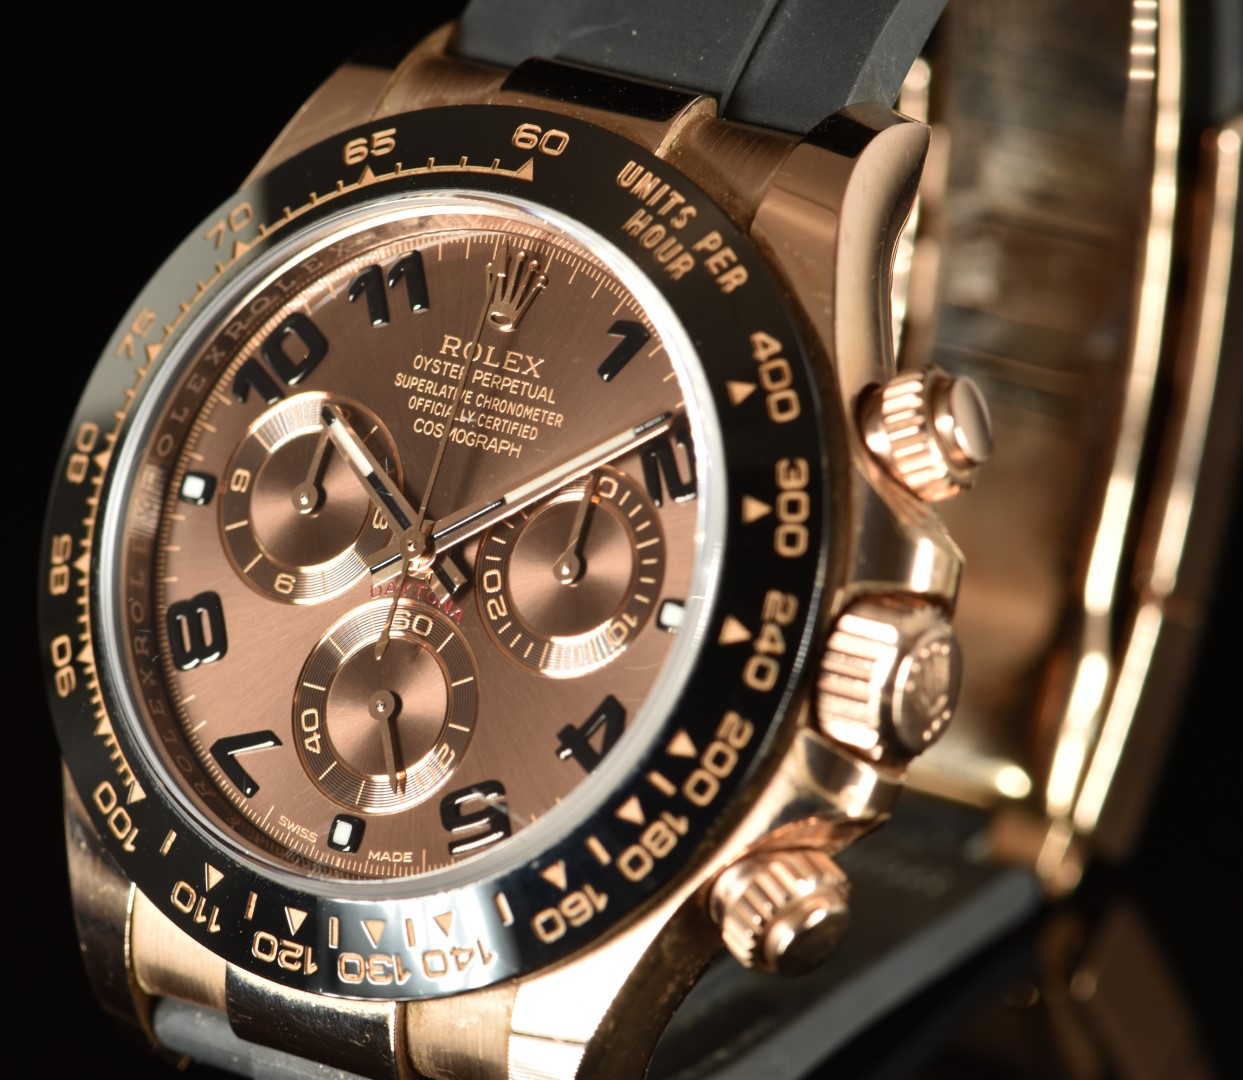 Rolex Oyster perpetual Cosmograph Daytona 18ct 'Everose' gold automatic chronograph wristwatch - Image 7 of 14